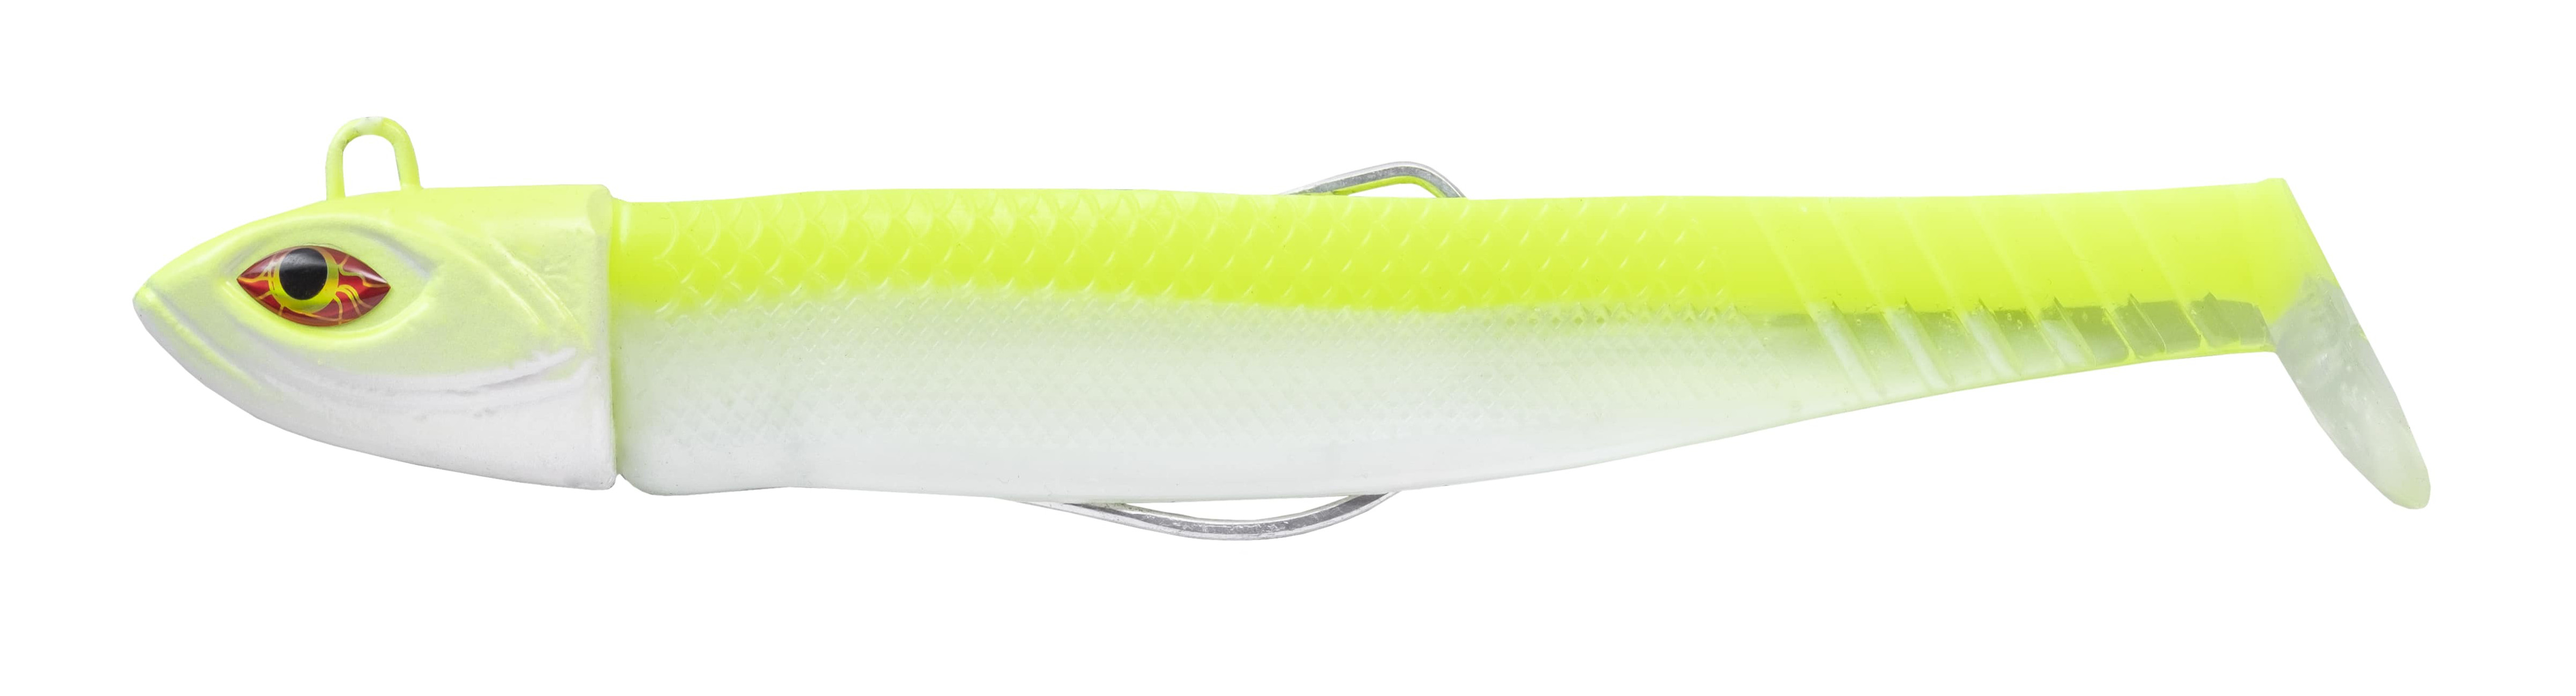 Cinnetic Crafty Candy Shad 10.5cm (25g) (2 pezzi) - White Chartreuse